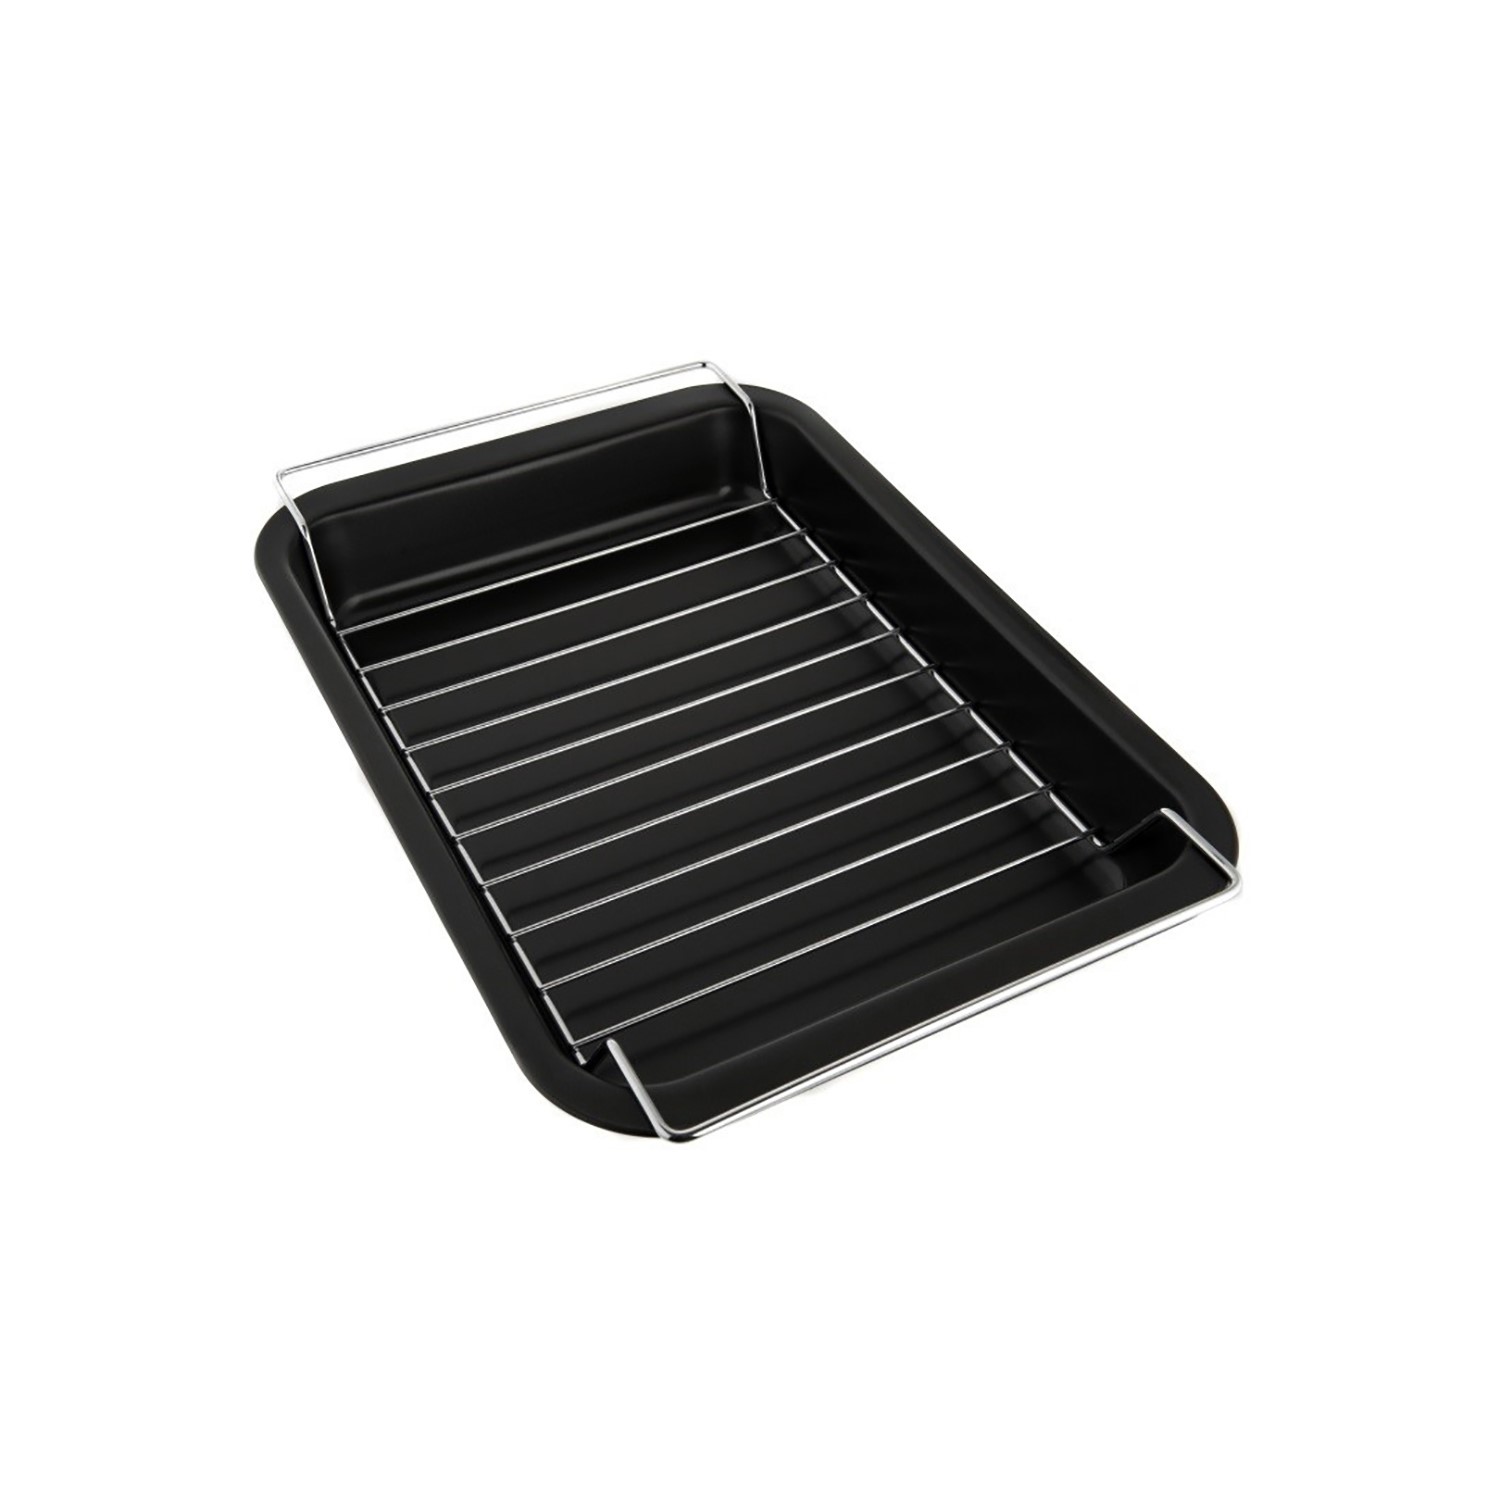 Care+Protect Roasting Pan with Grill Rack For Ovens And Grills